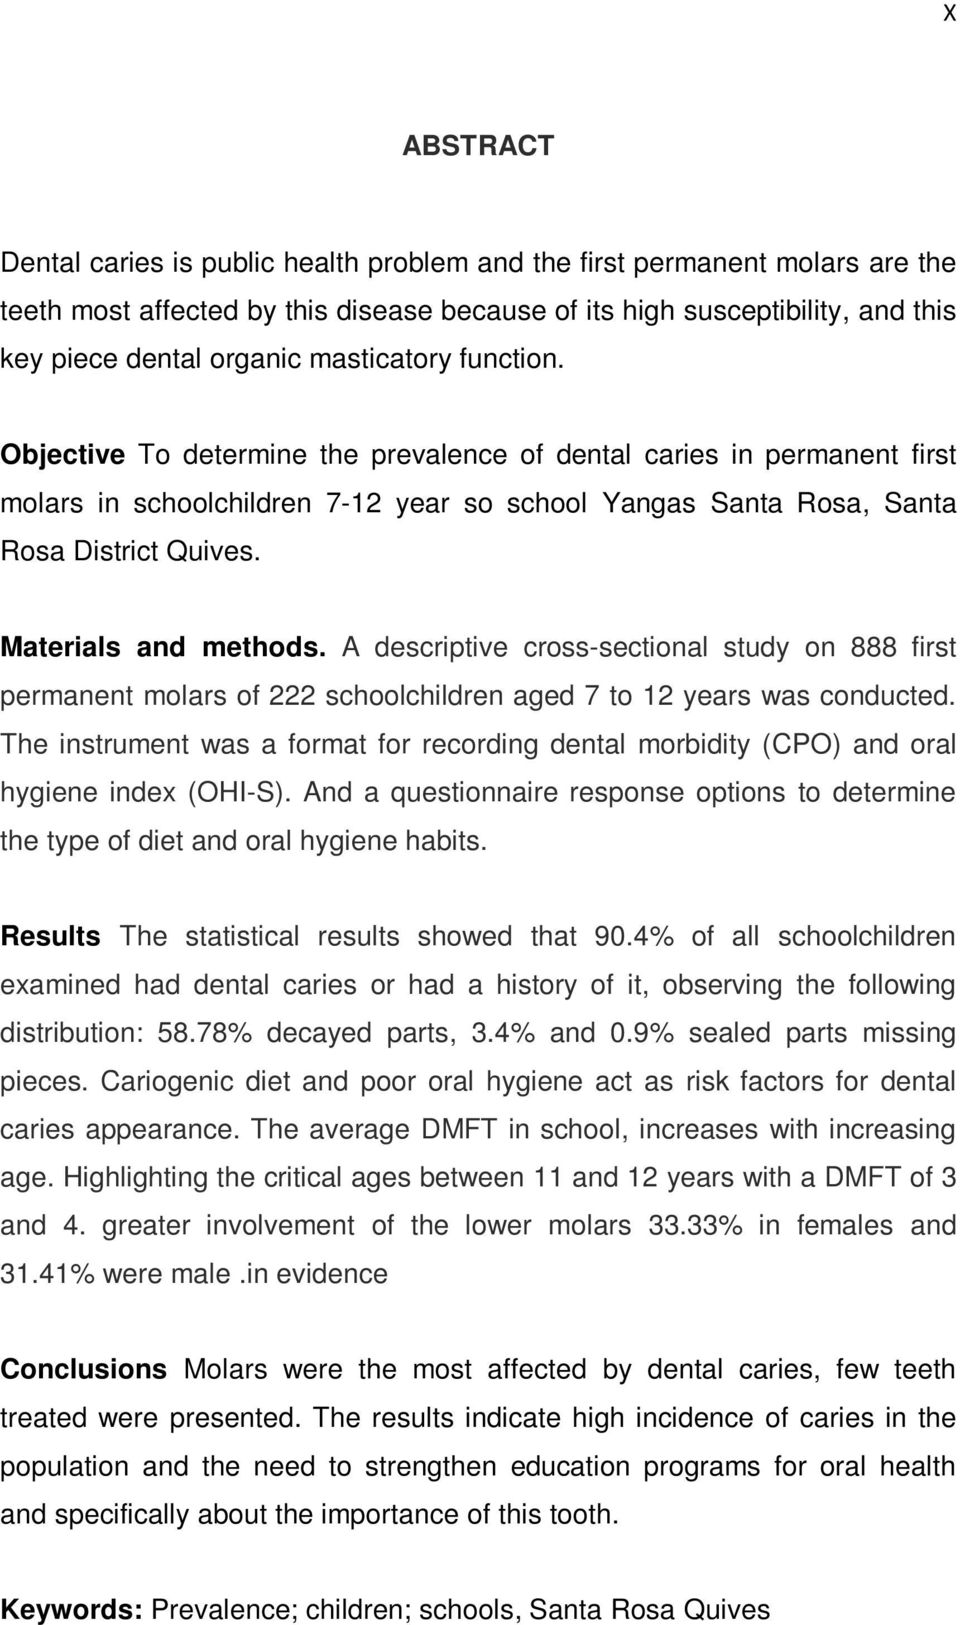 Materials and methods. A descriptive cross-sectional study on 888 first permanent molars of 222 schoolchildren aged 7 to 12 years was conducted.